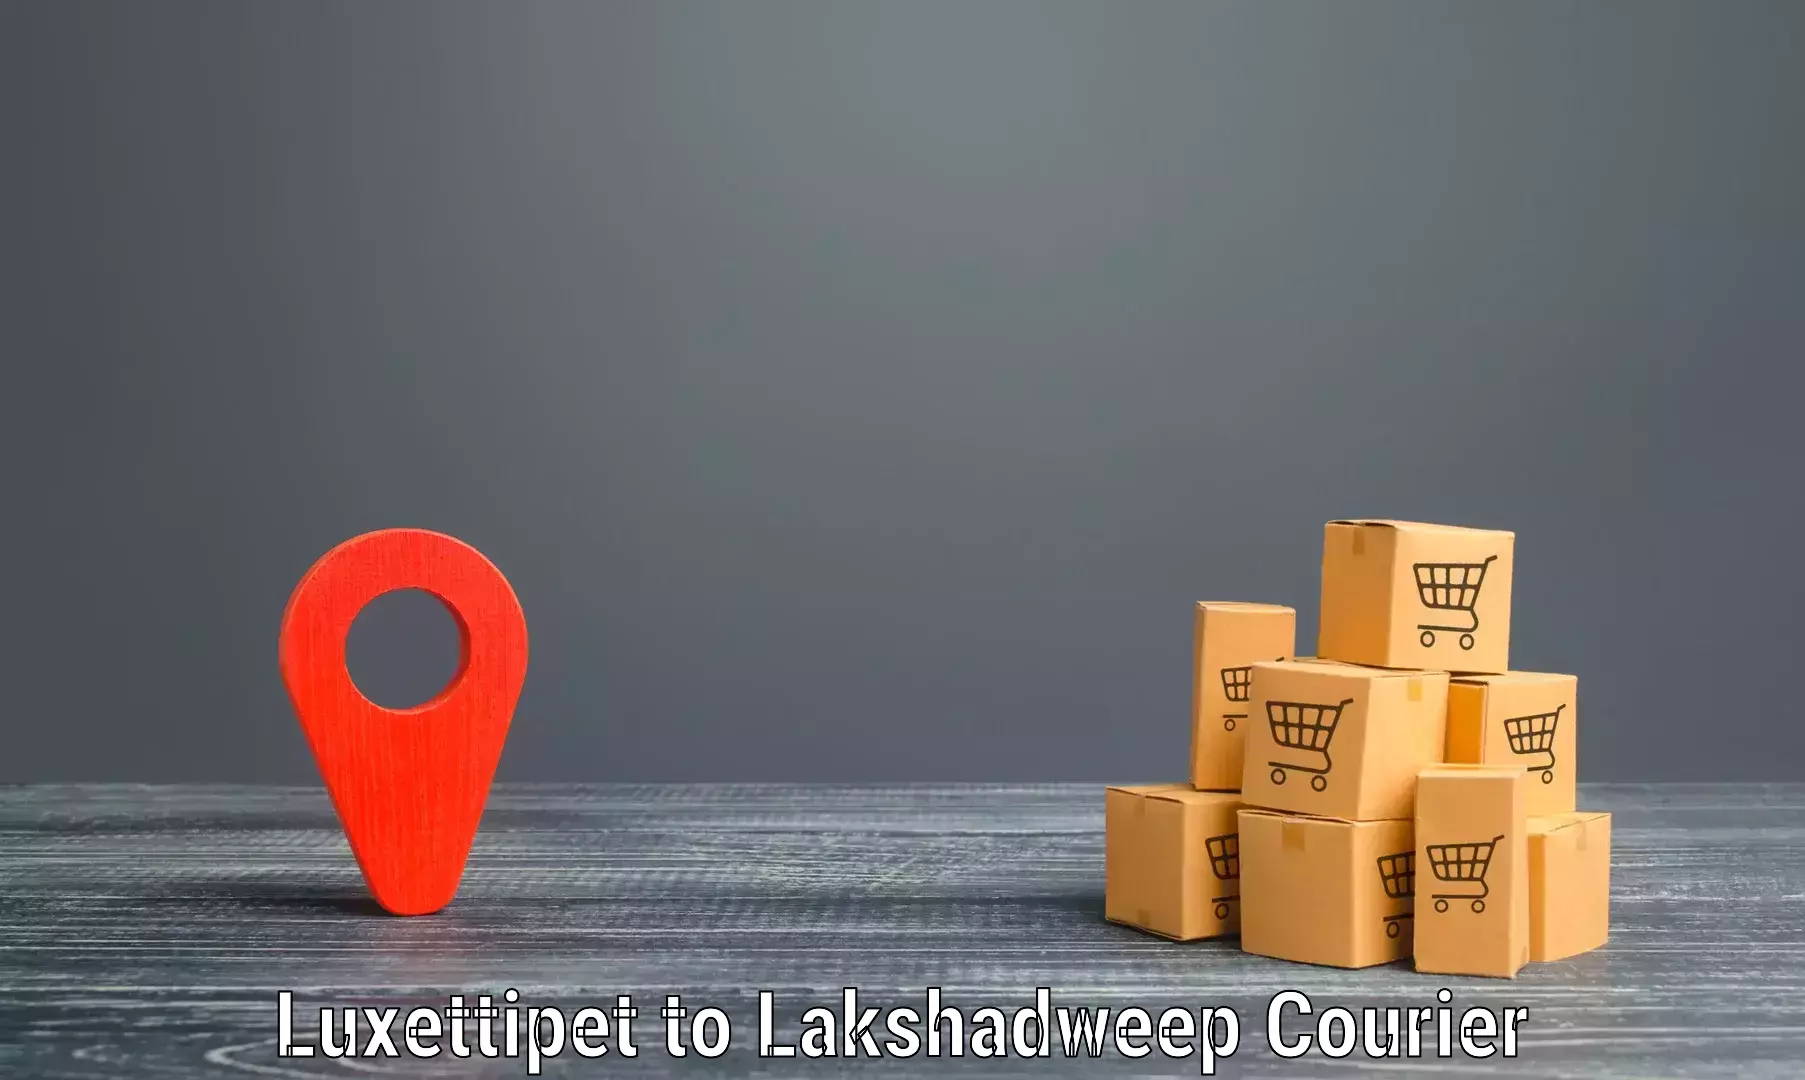 Scheduled delivery in Luxettipet to Lakshadweep